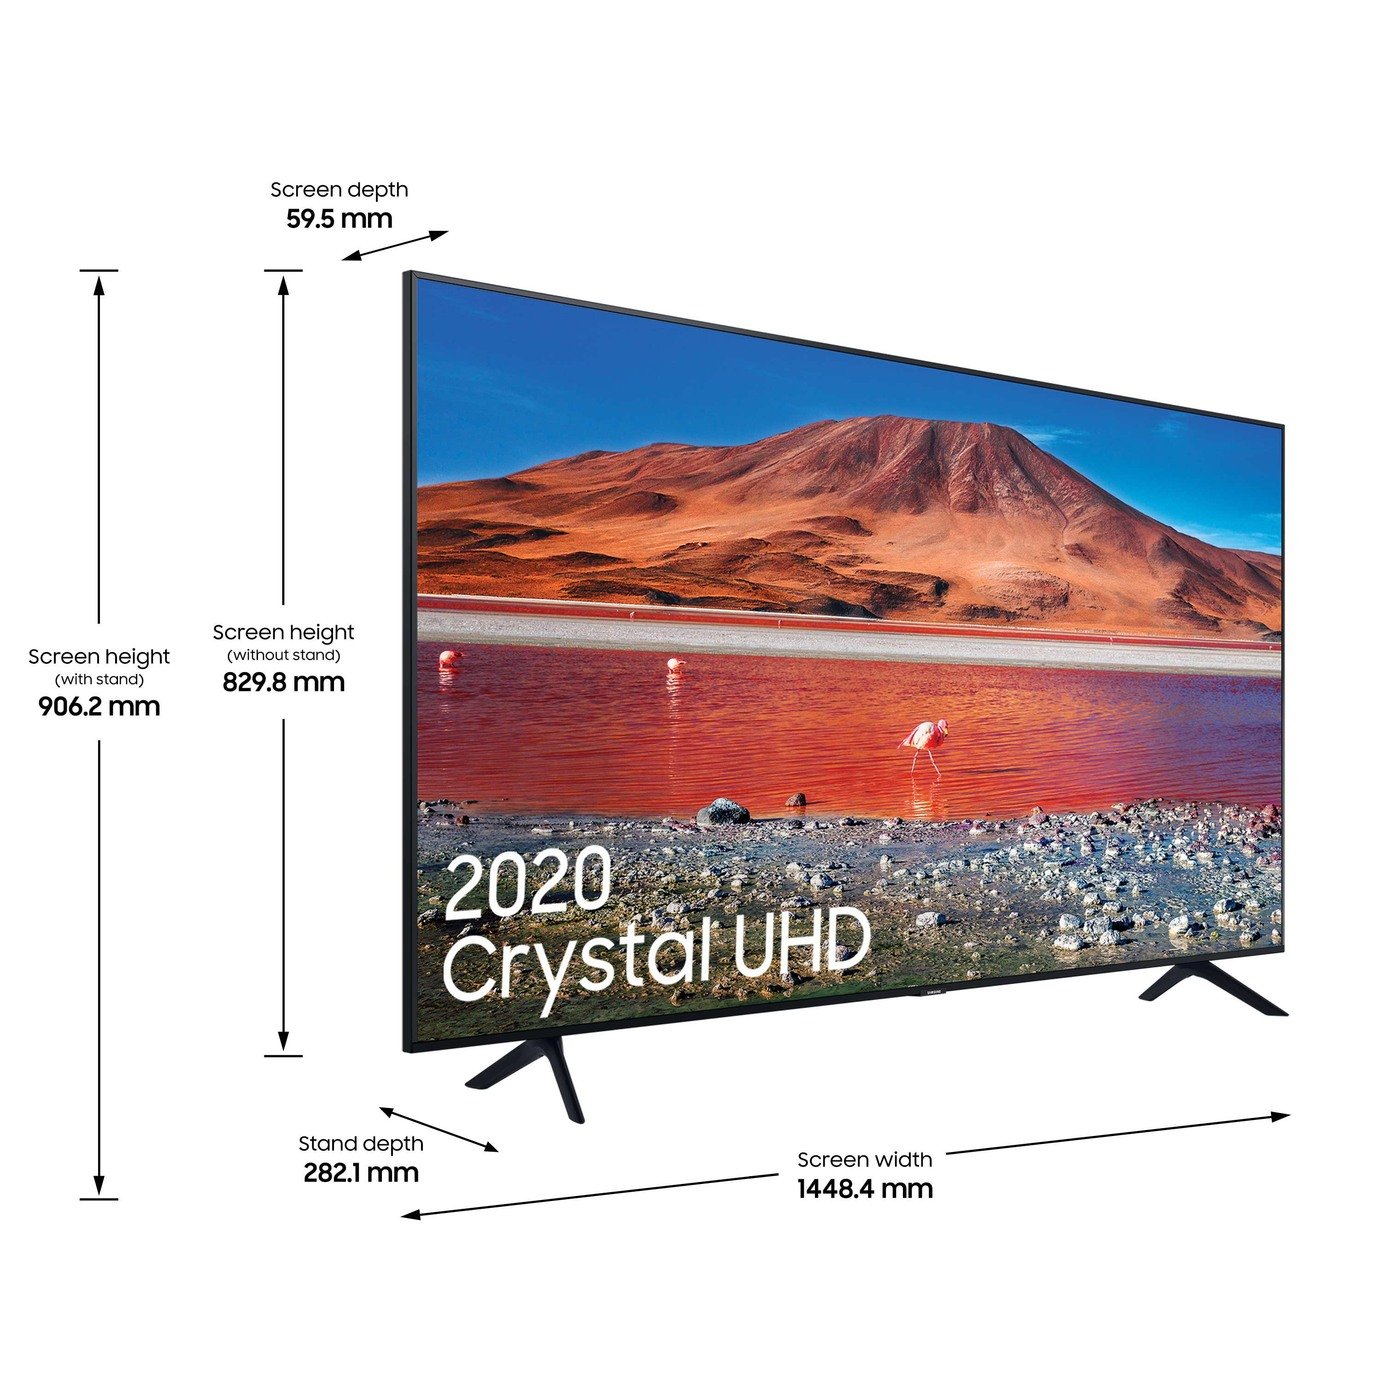 Samsung 65 Inch UE65TU7000KXXU Smart 4K Ultra HD TV with HDR Review